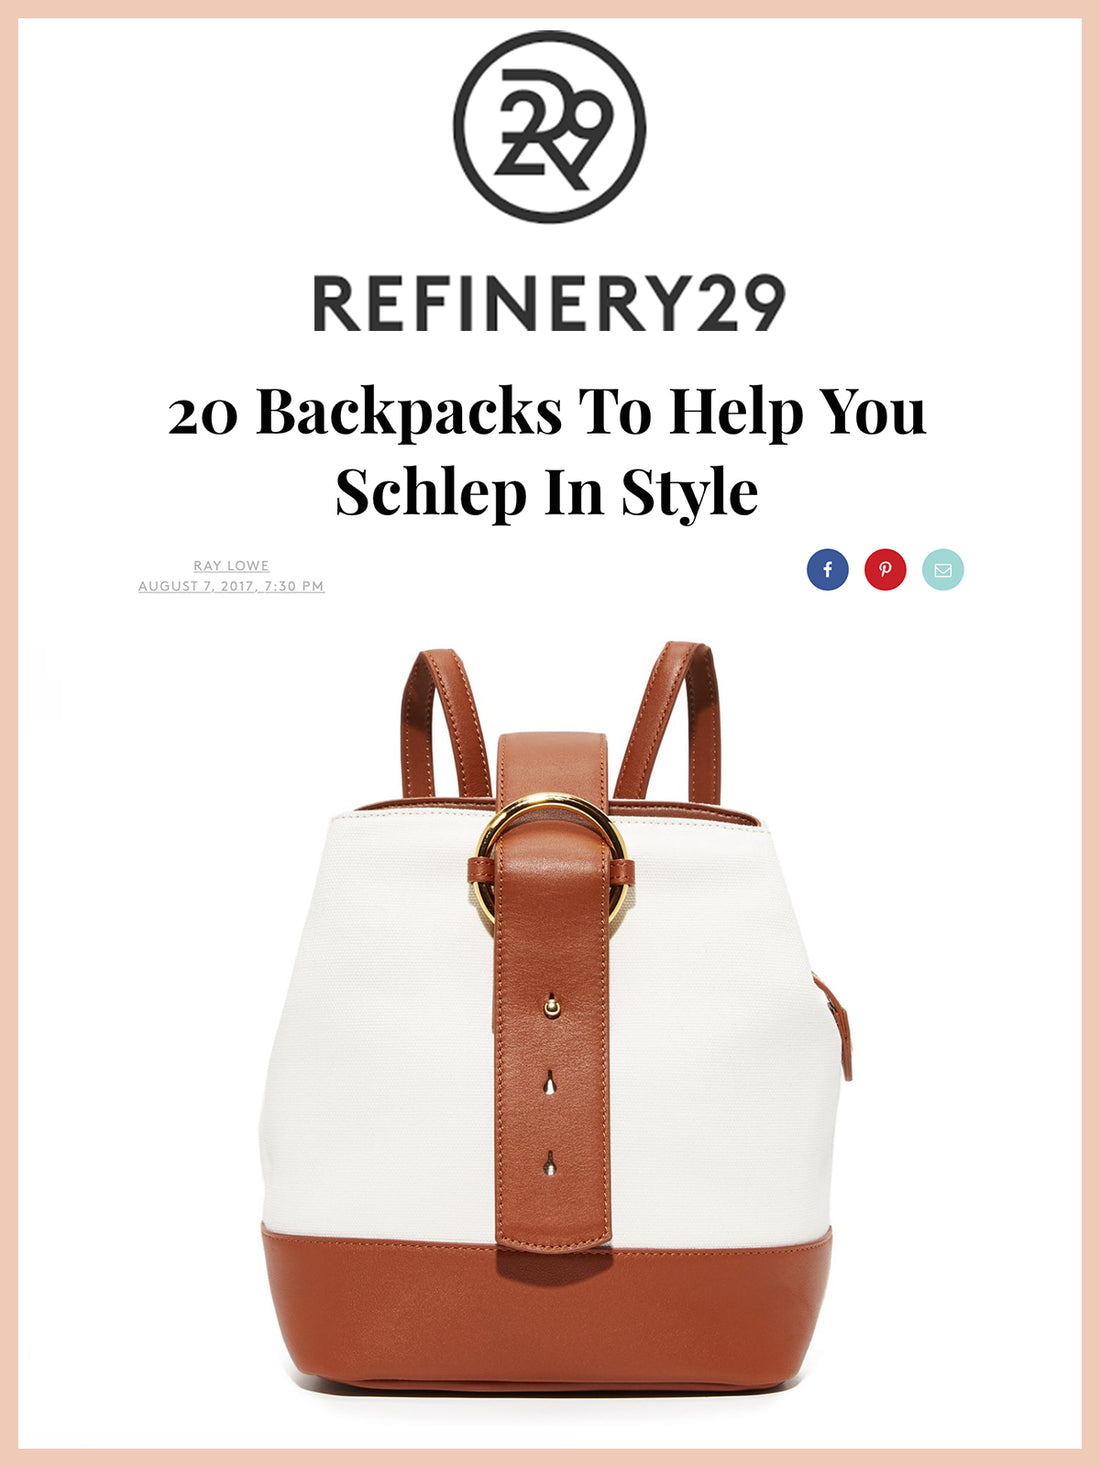 REFINERY29, 20 Backpacks To Help You Schlep In Style